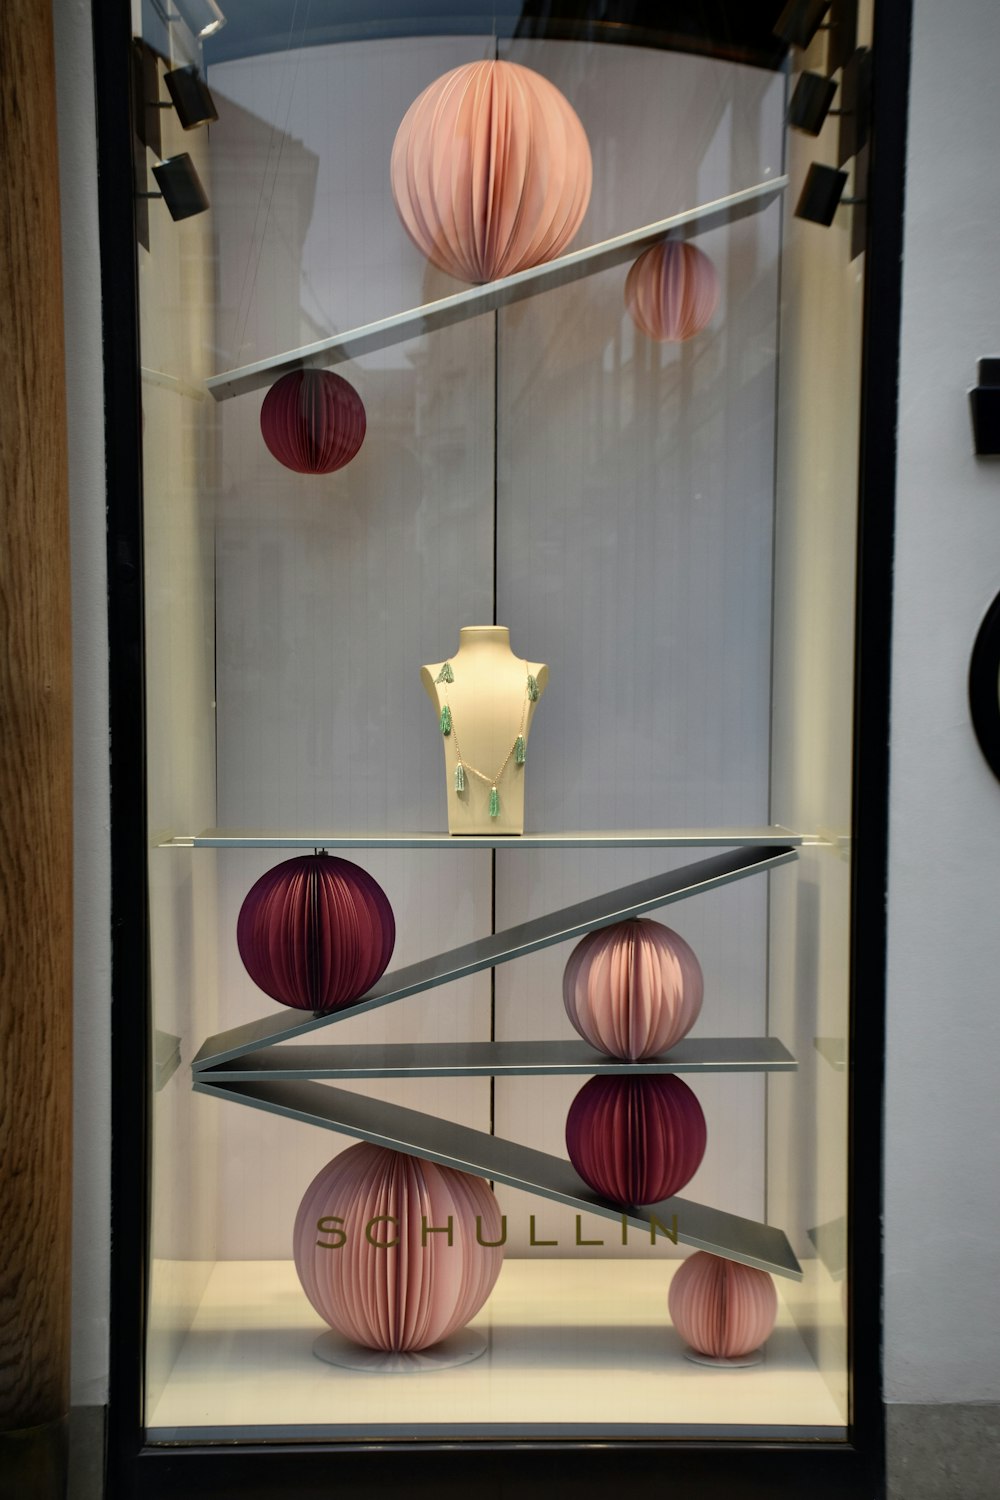 a display case filled with pink and white paper lanterns